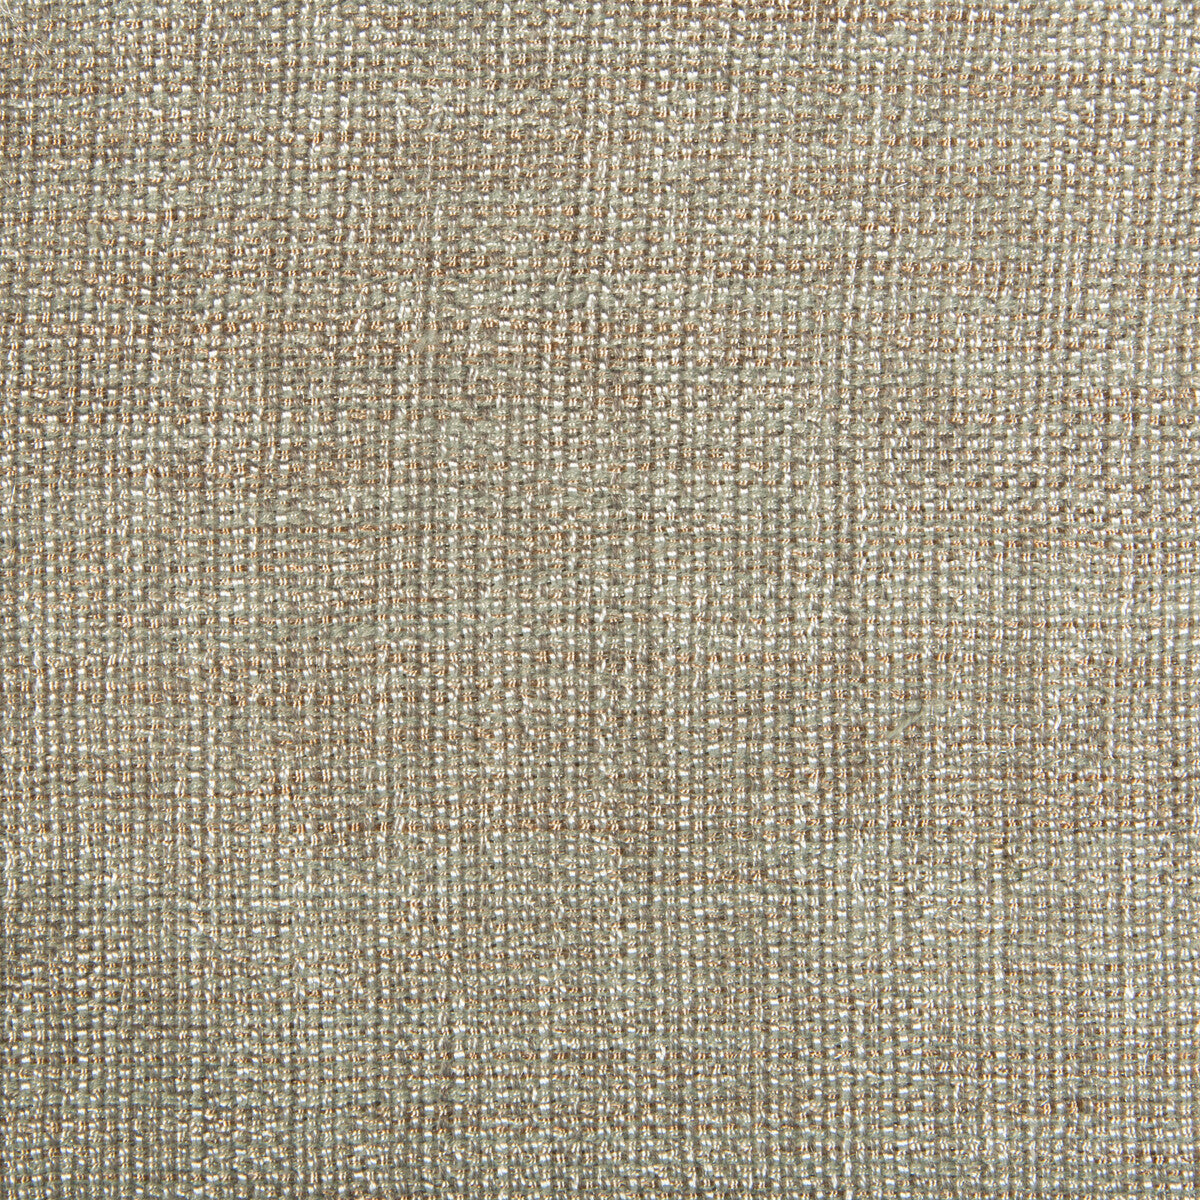 Kravet Contract fabric in 4458-1101 color - pattern 4458.1101.0 - by Kravet Contract